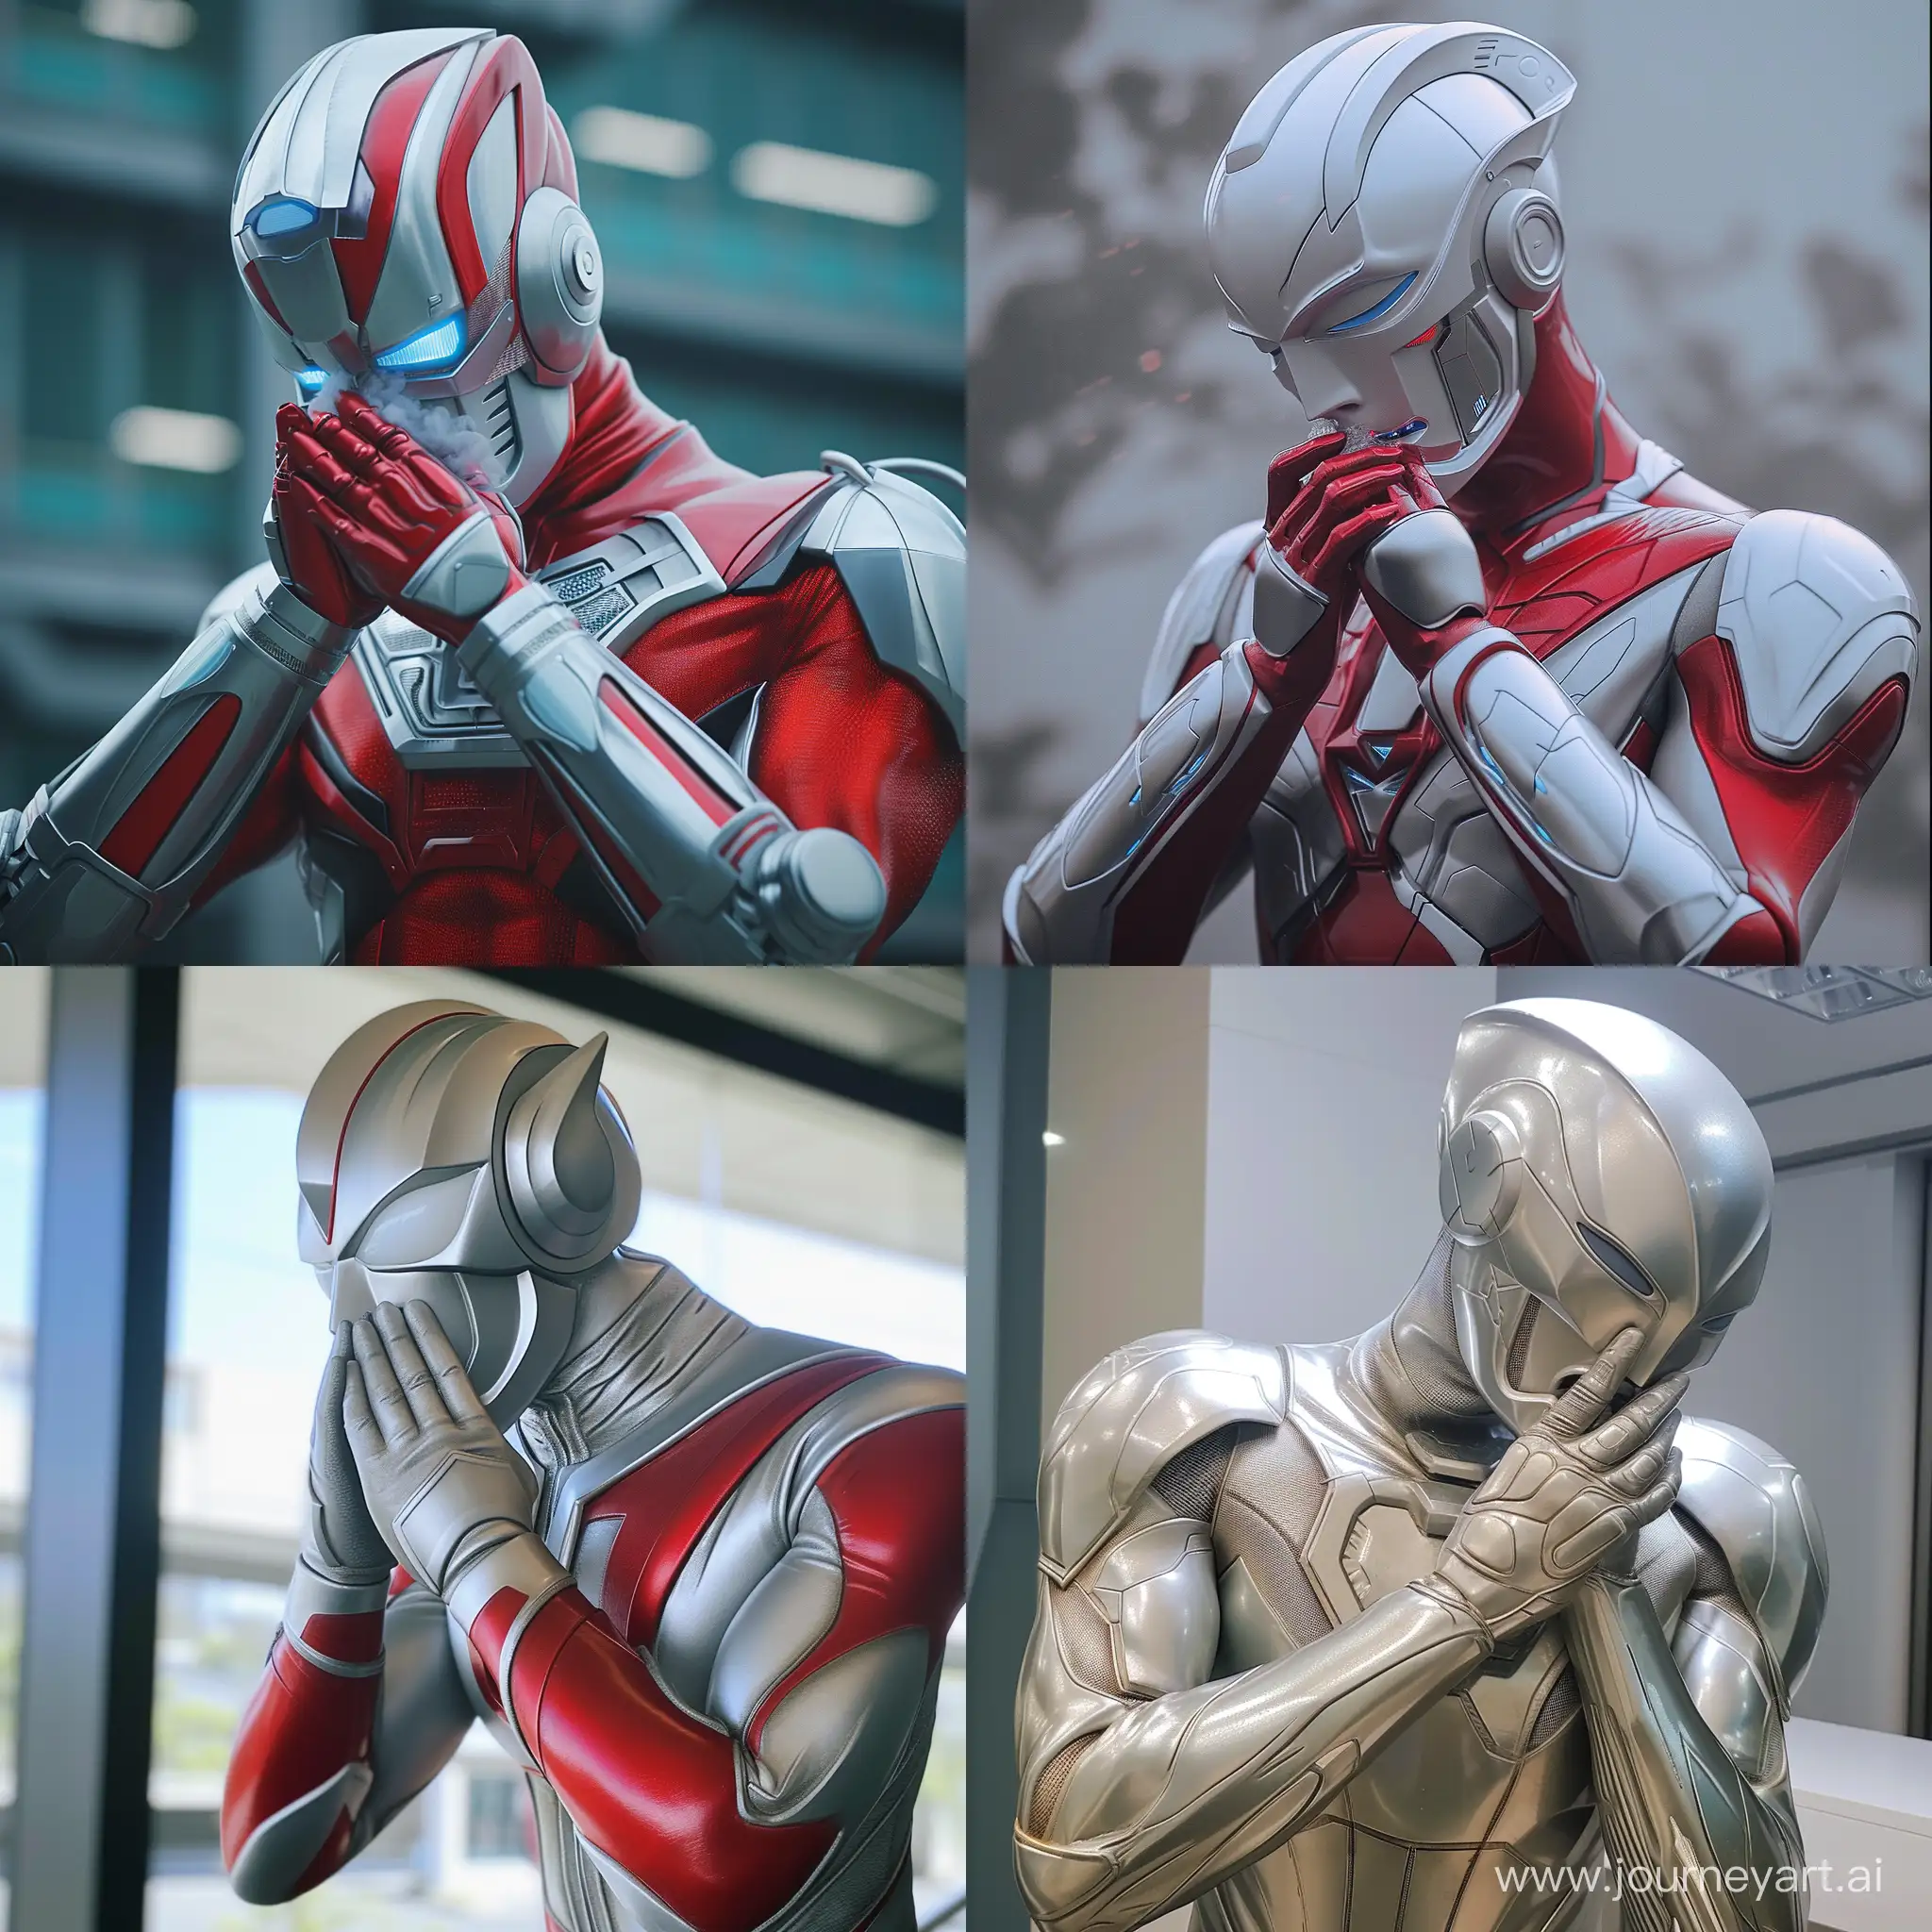 Realistic-Ultraman-Coughing-A-Unique-and-Authentic-Depiction